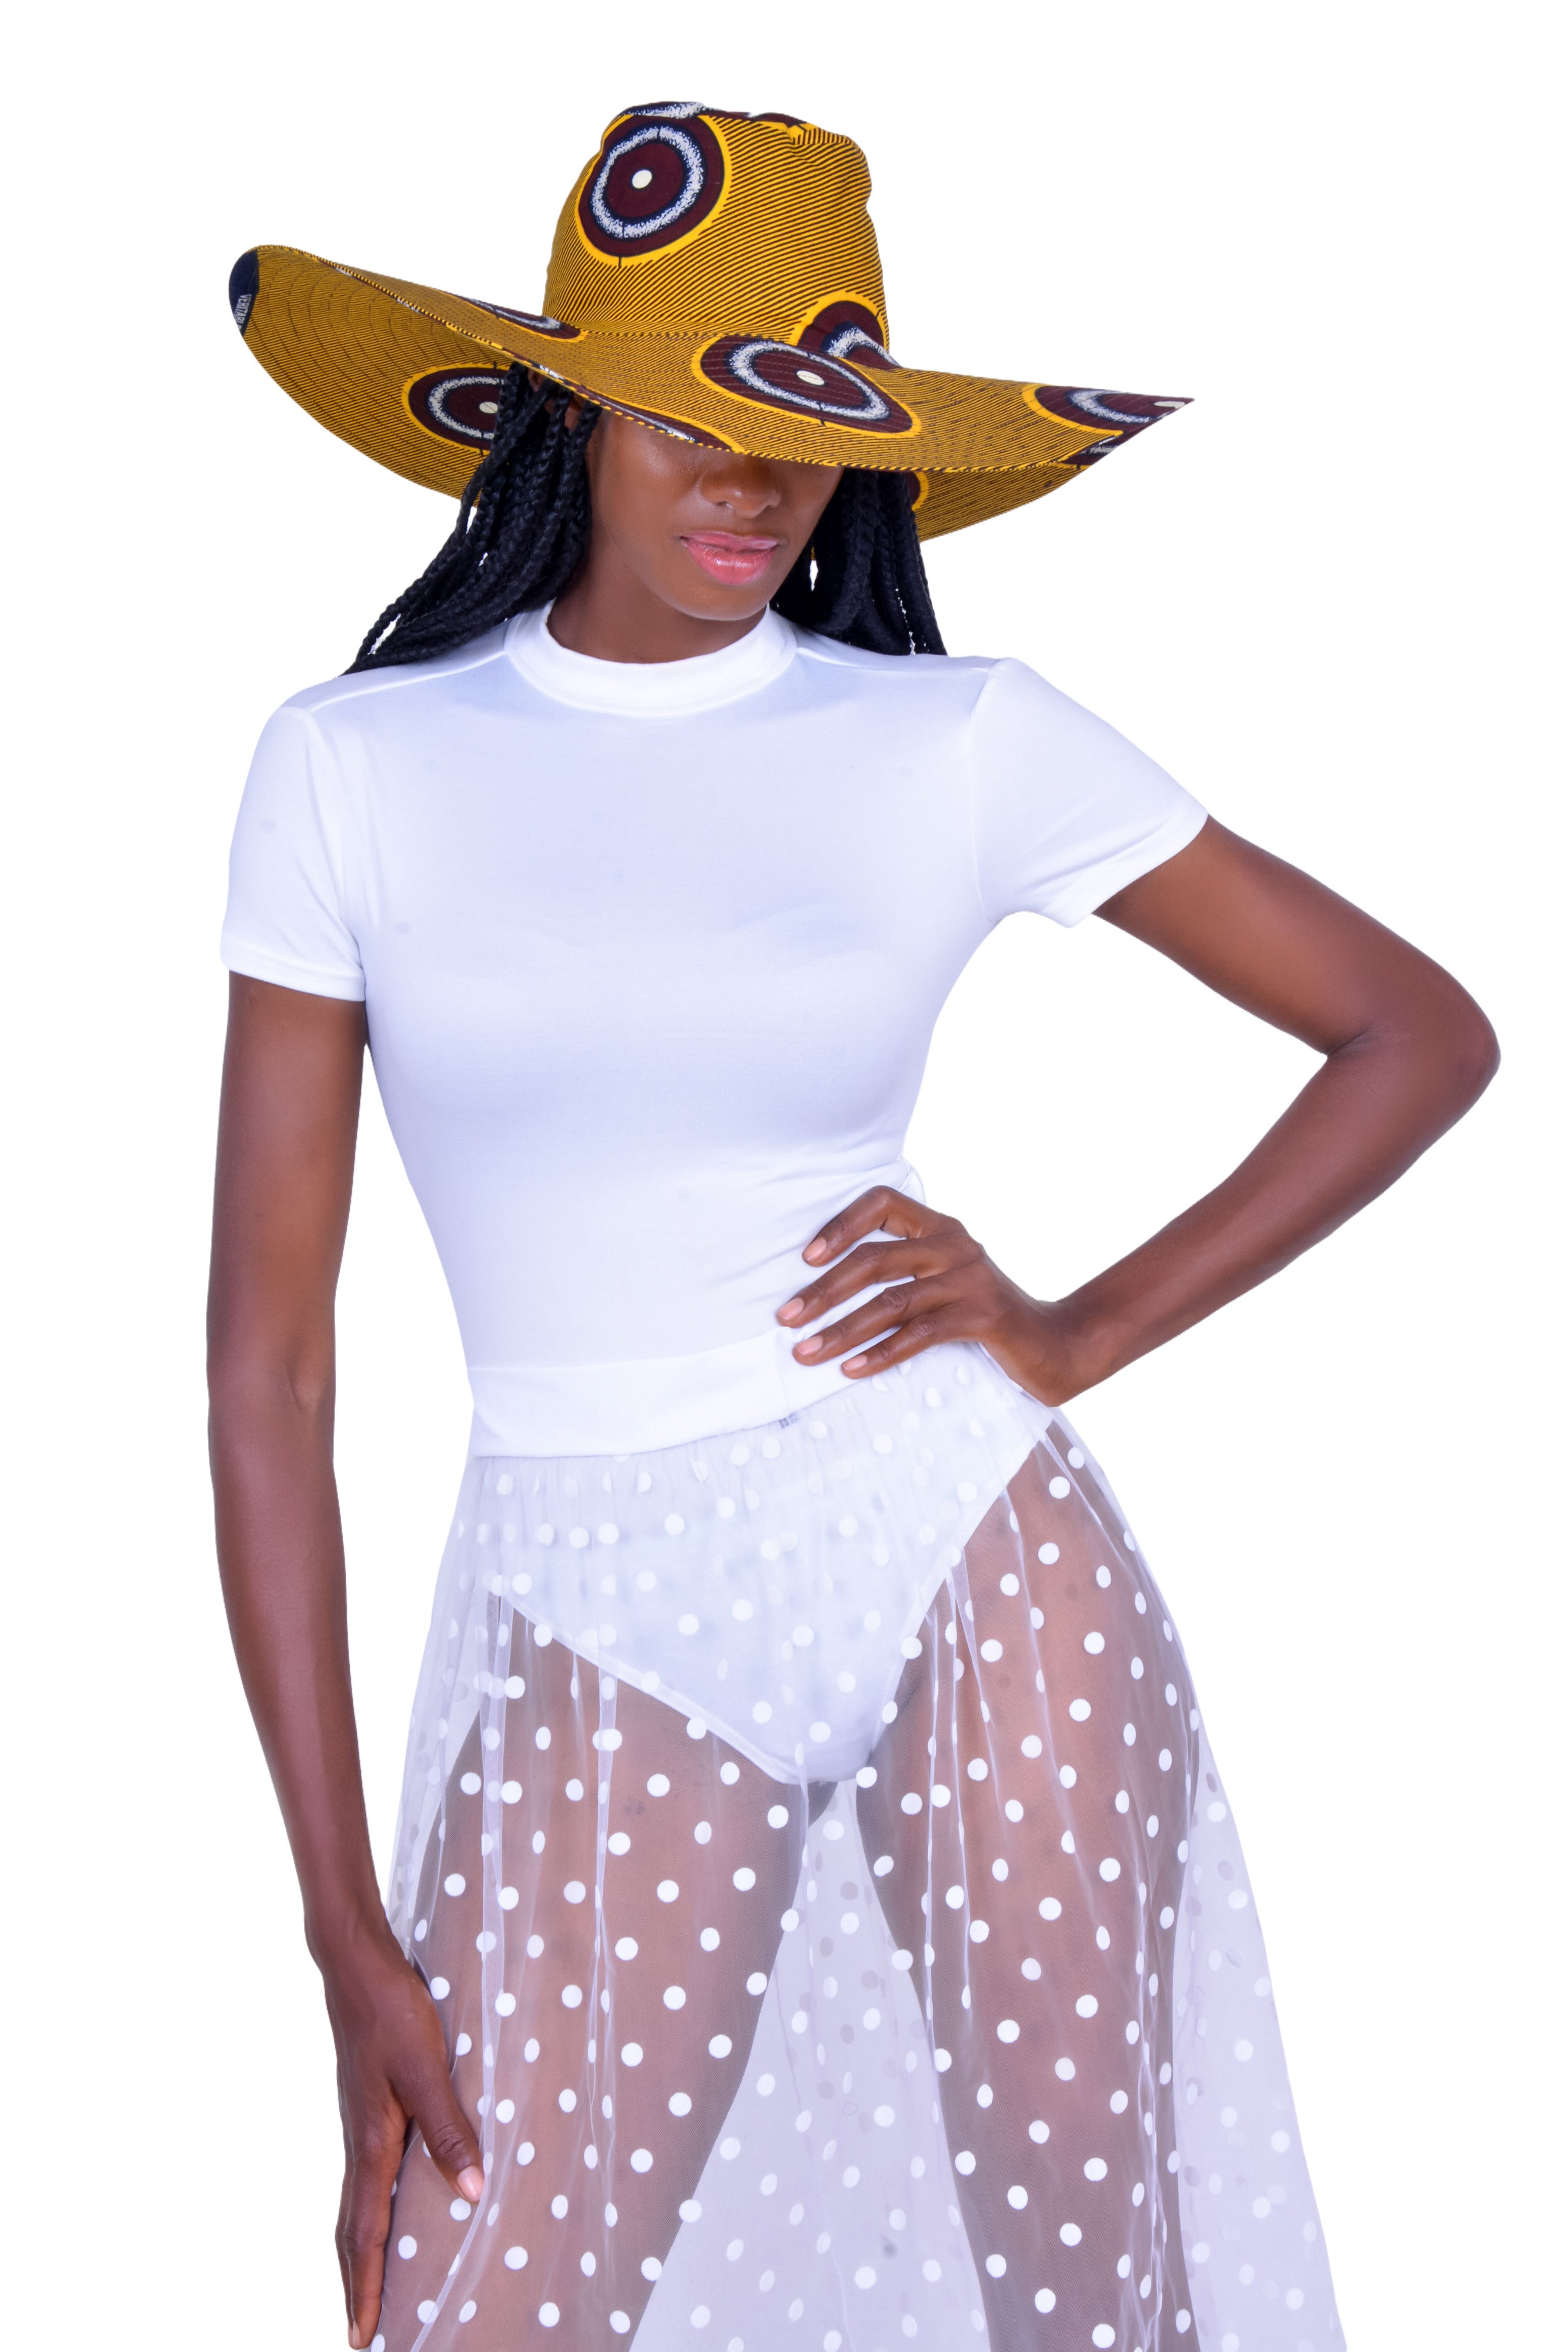 Jollo Swala Modern African Hat: let comfort and style give you the best shade.